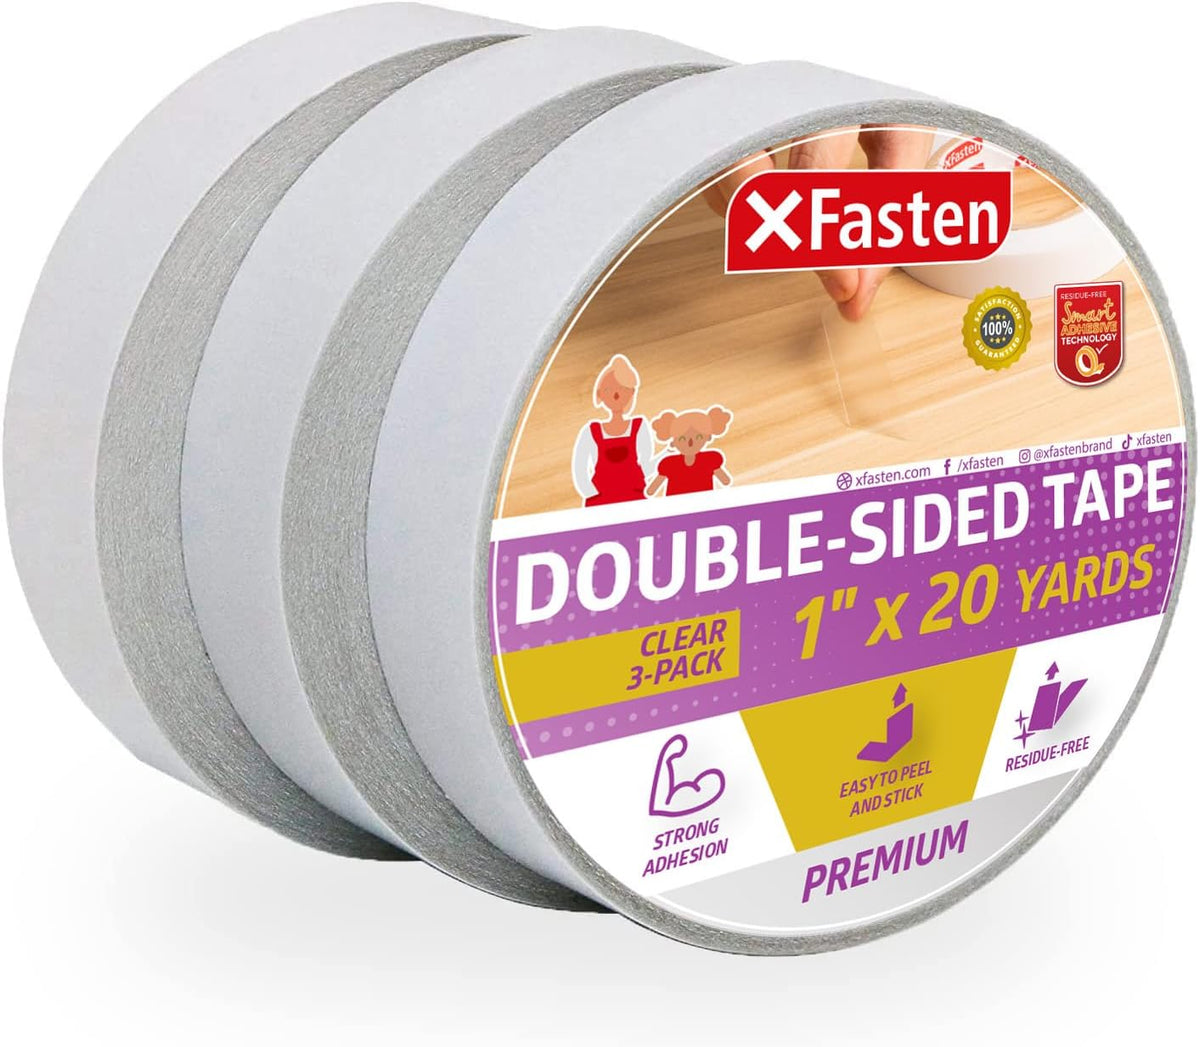 XFasten Fabric and Vinyl Repair Tape, Clear, 3-Inches by 20-Inches